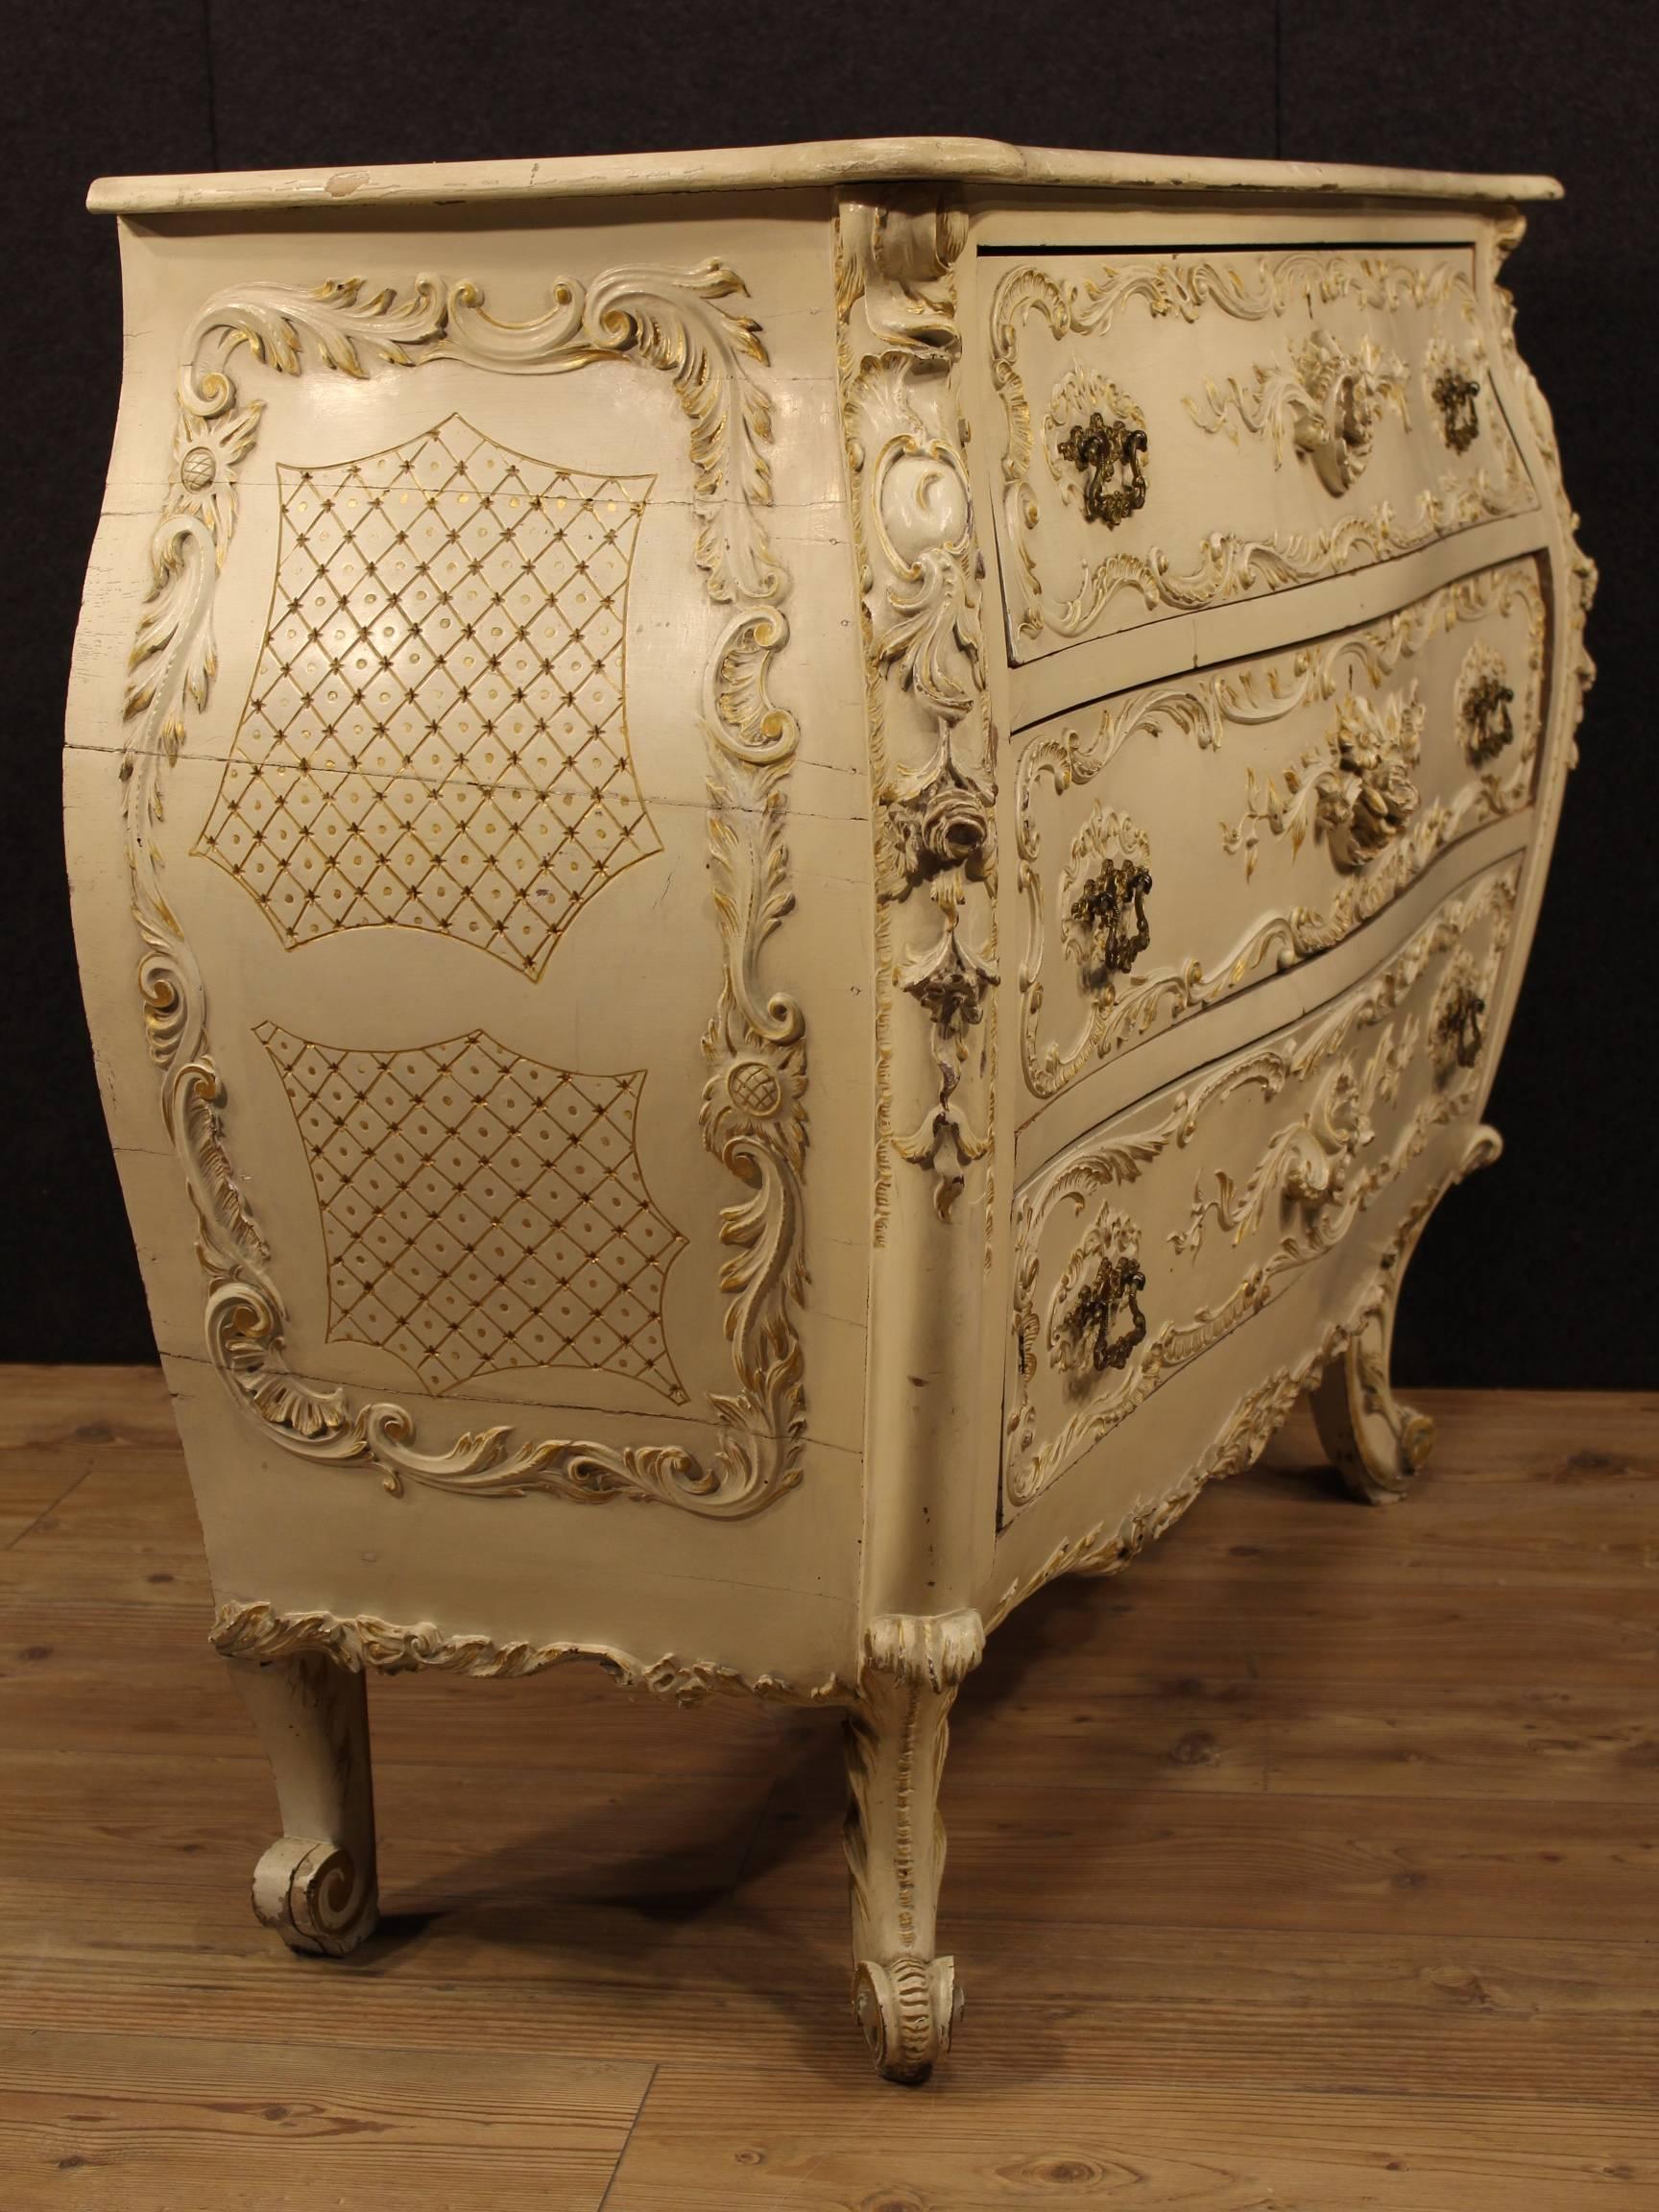 Great Italian chest of drawers of the early 20th century. Furniture made by richly carved and lacquered wood with floral decorations in relief. Dresser with urn pleasantly decorated with gilding. Furniture rounded and curved of special construction,